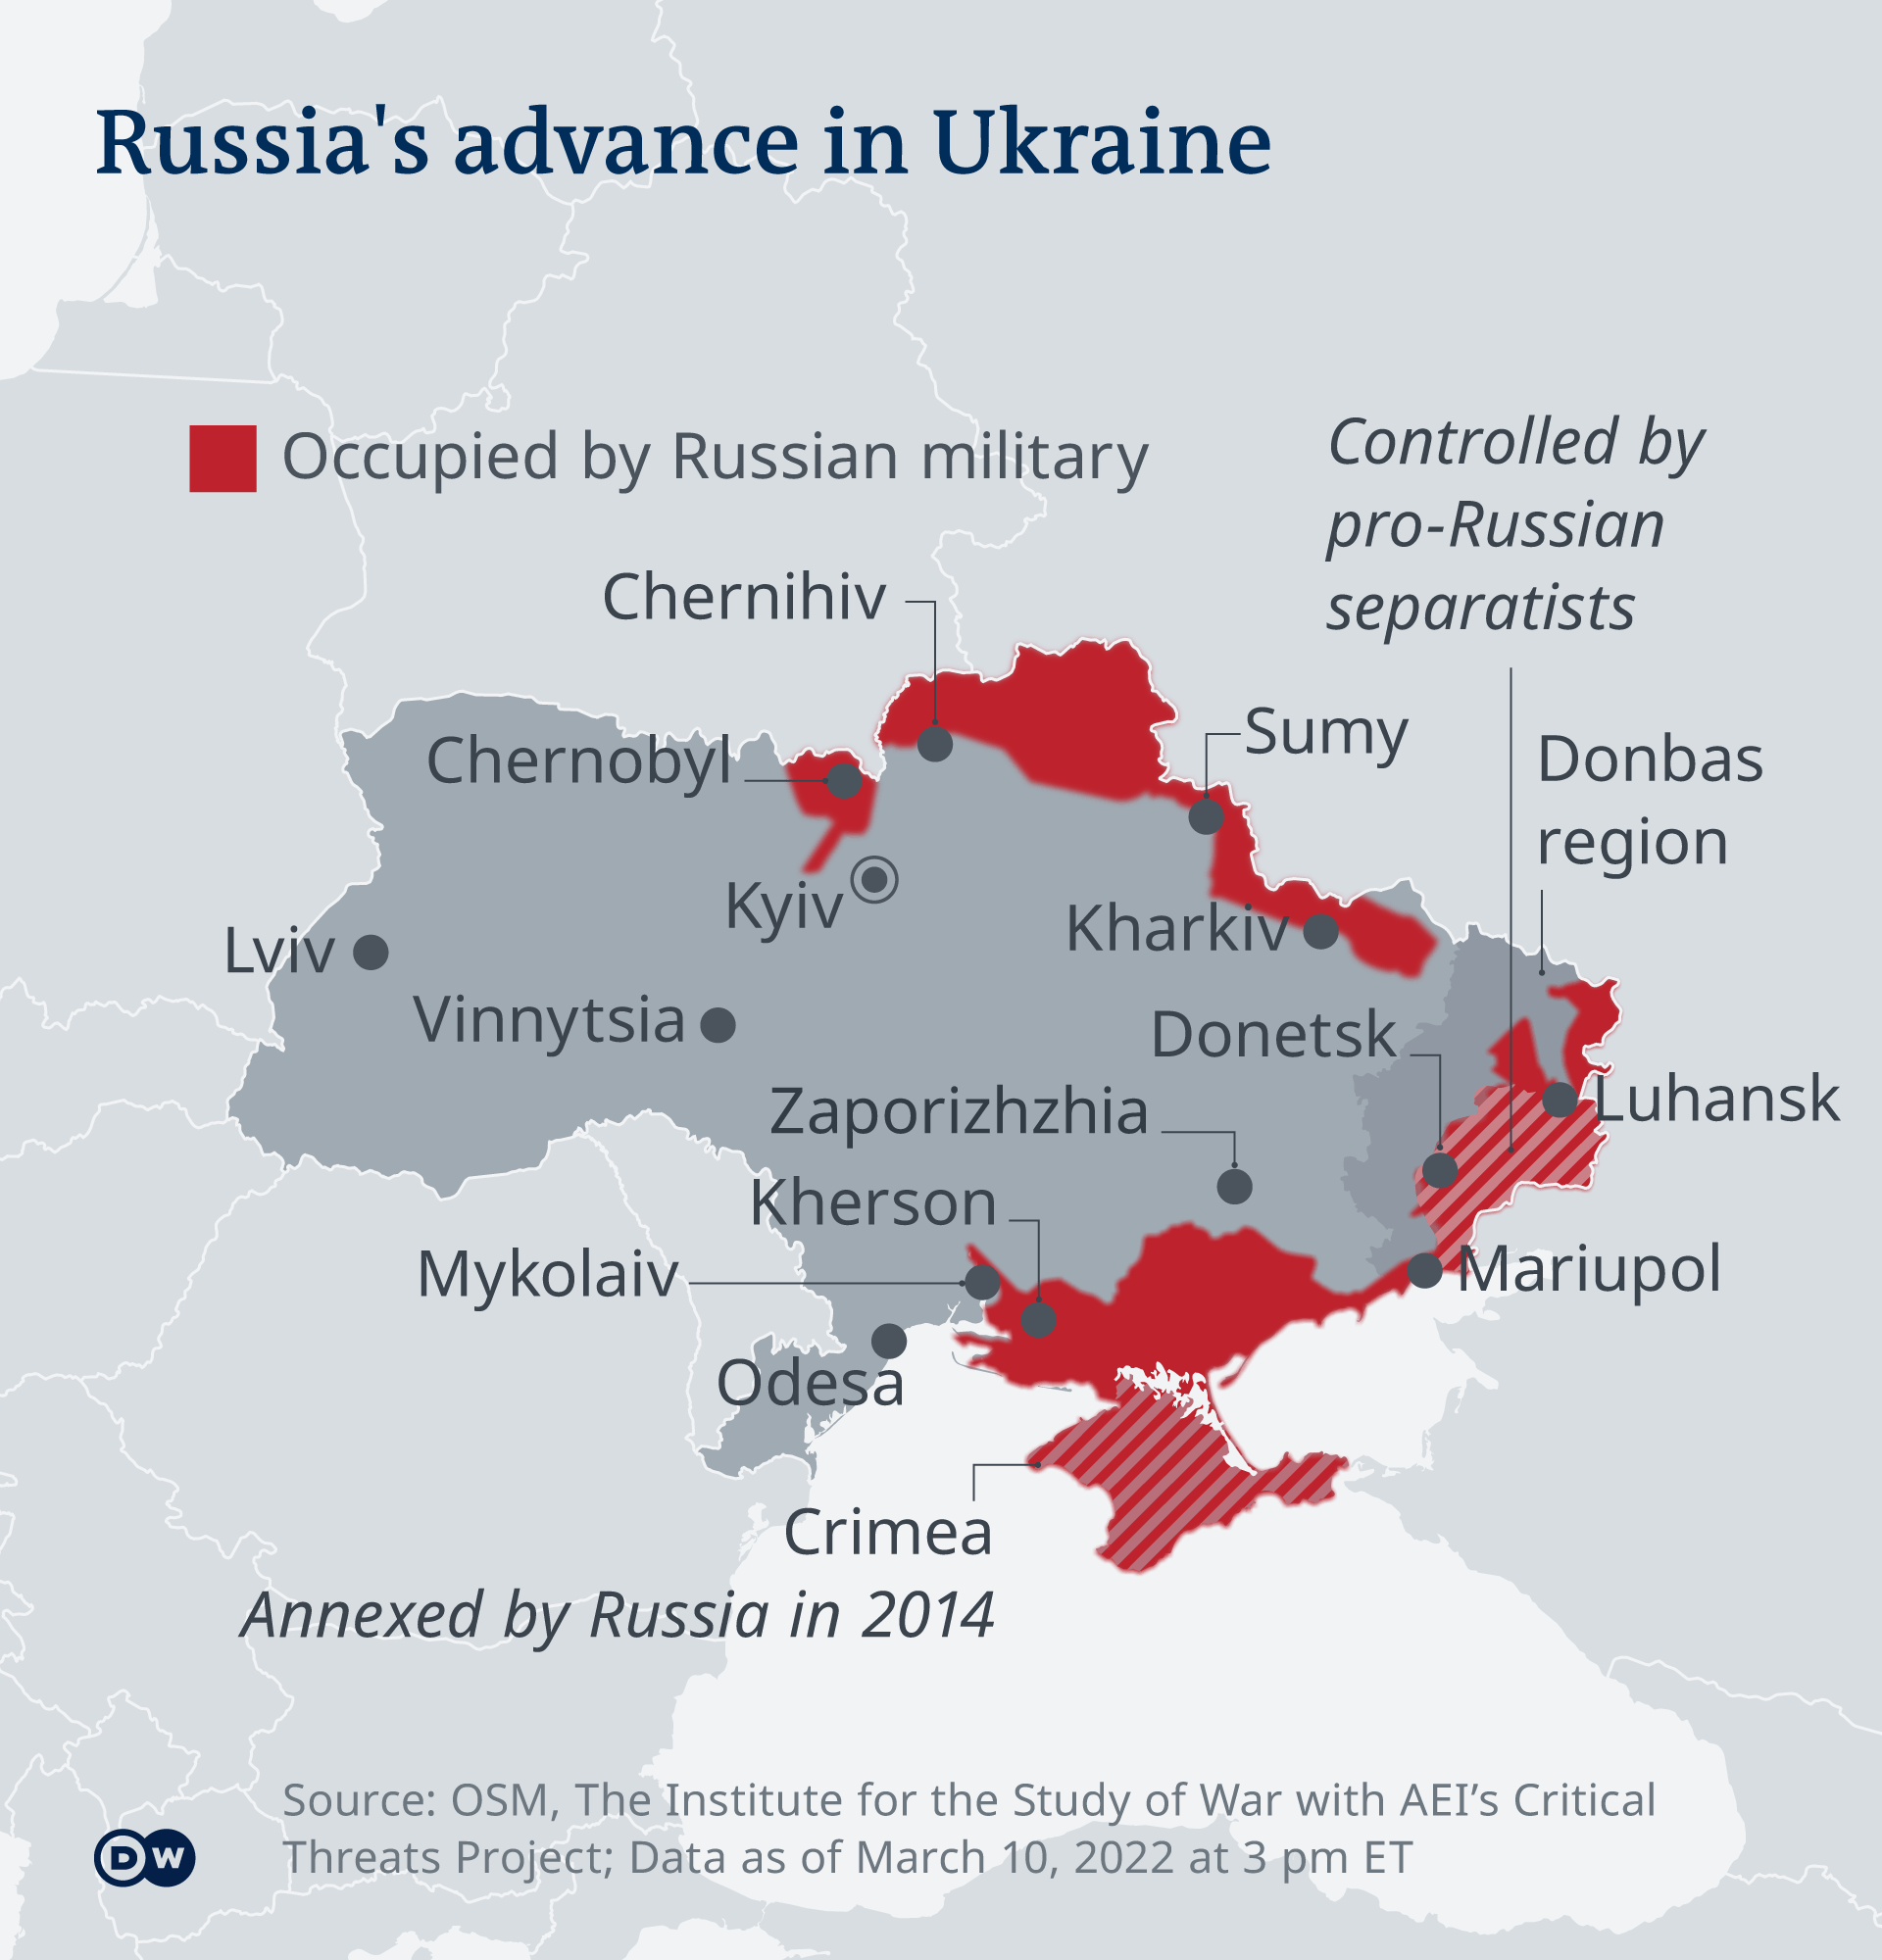 A map illustrating Russia's advance in Ukraine as of March 10